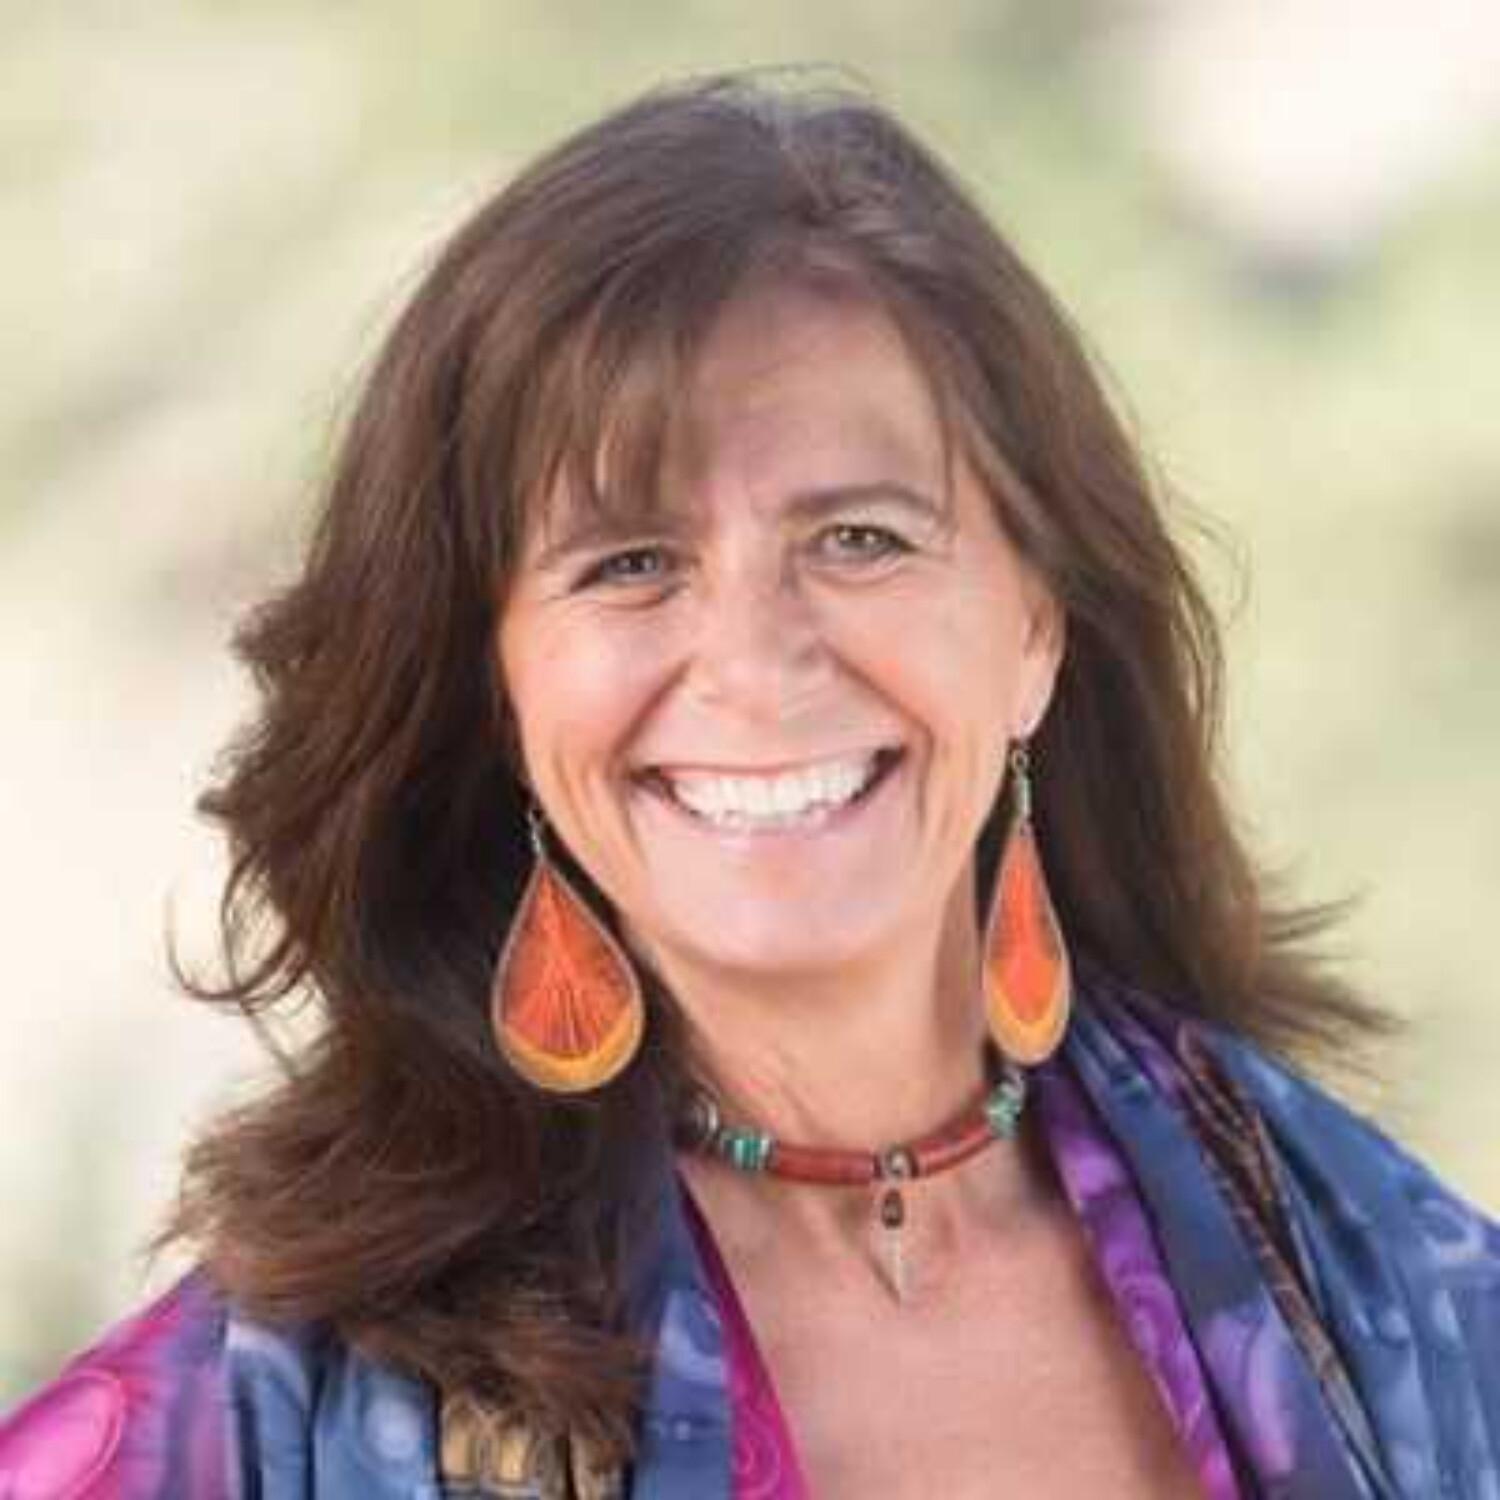 Journey to Inner Freedom A Powerful Conversation with Kimberly Braun